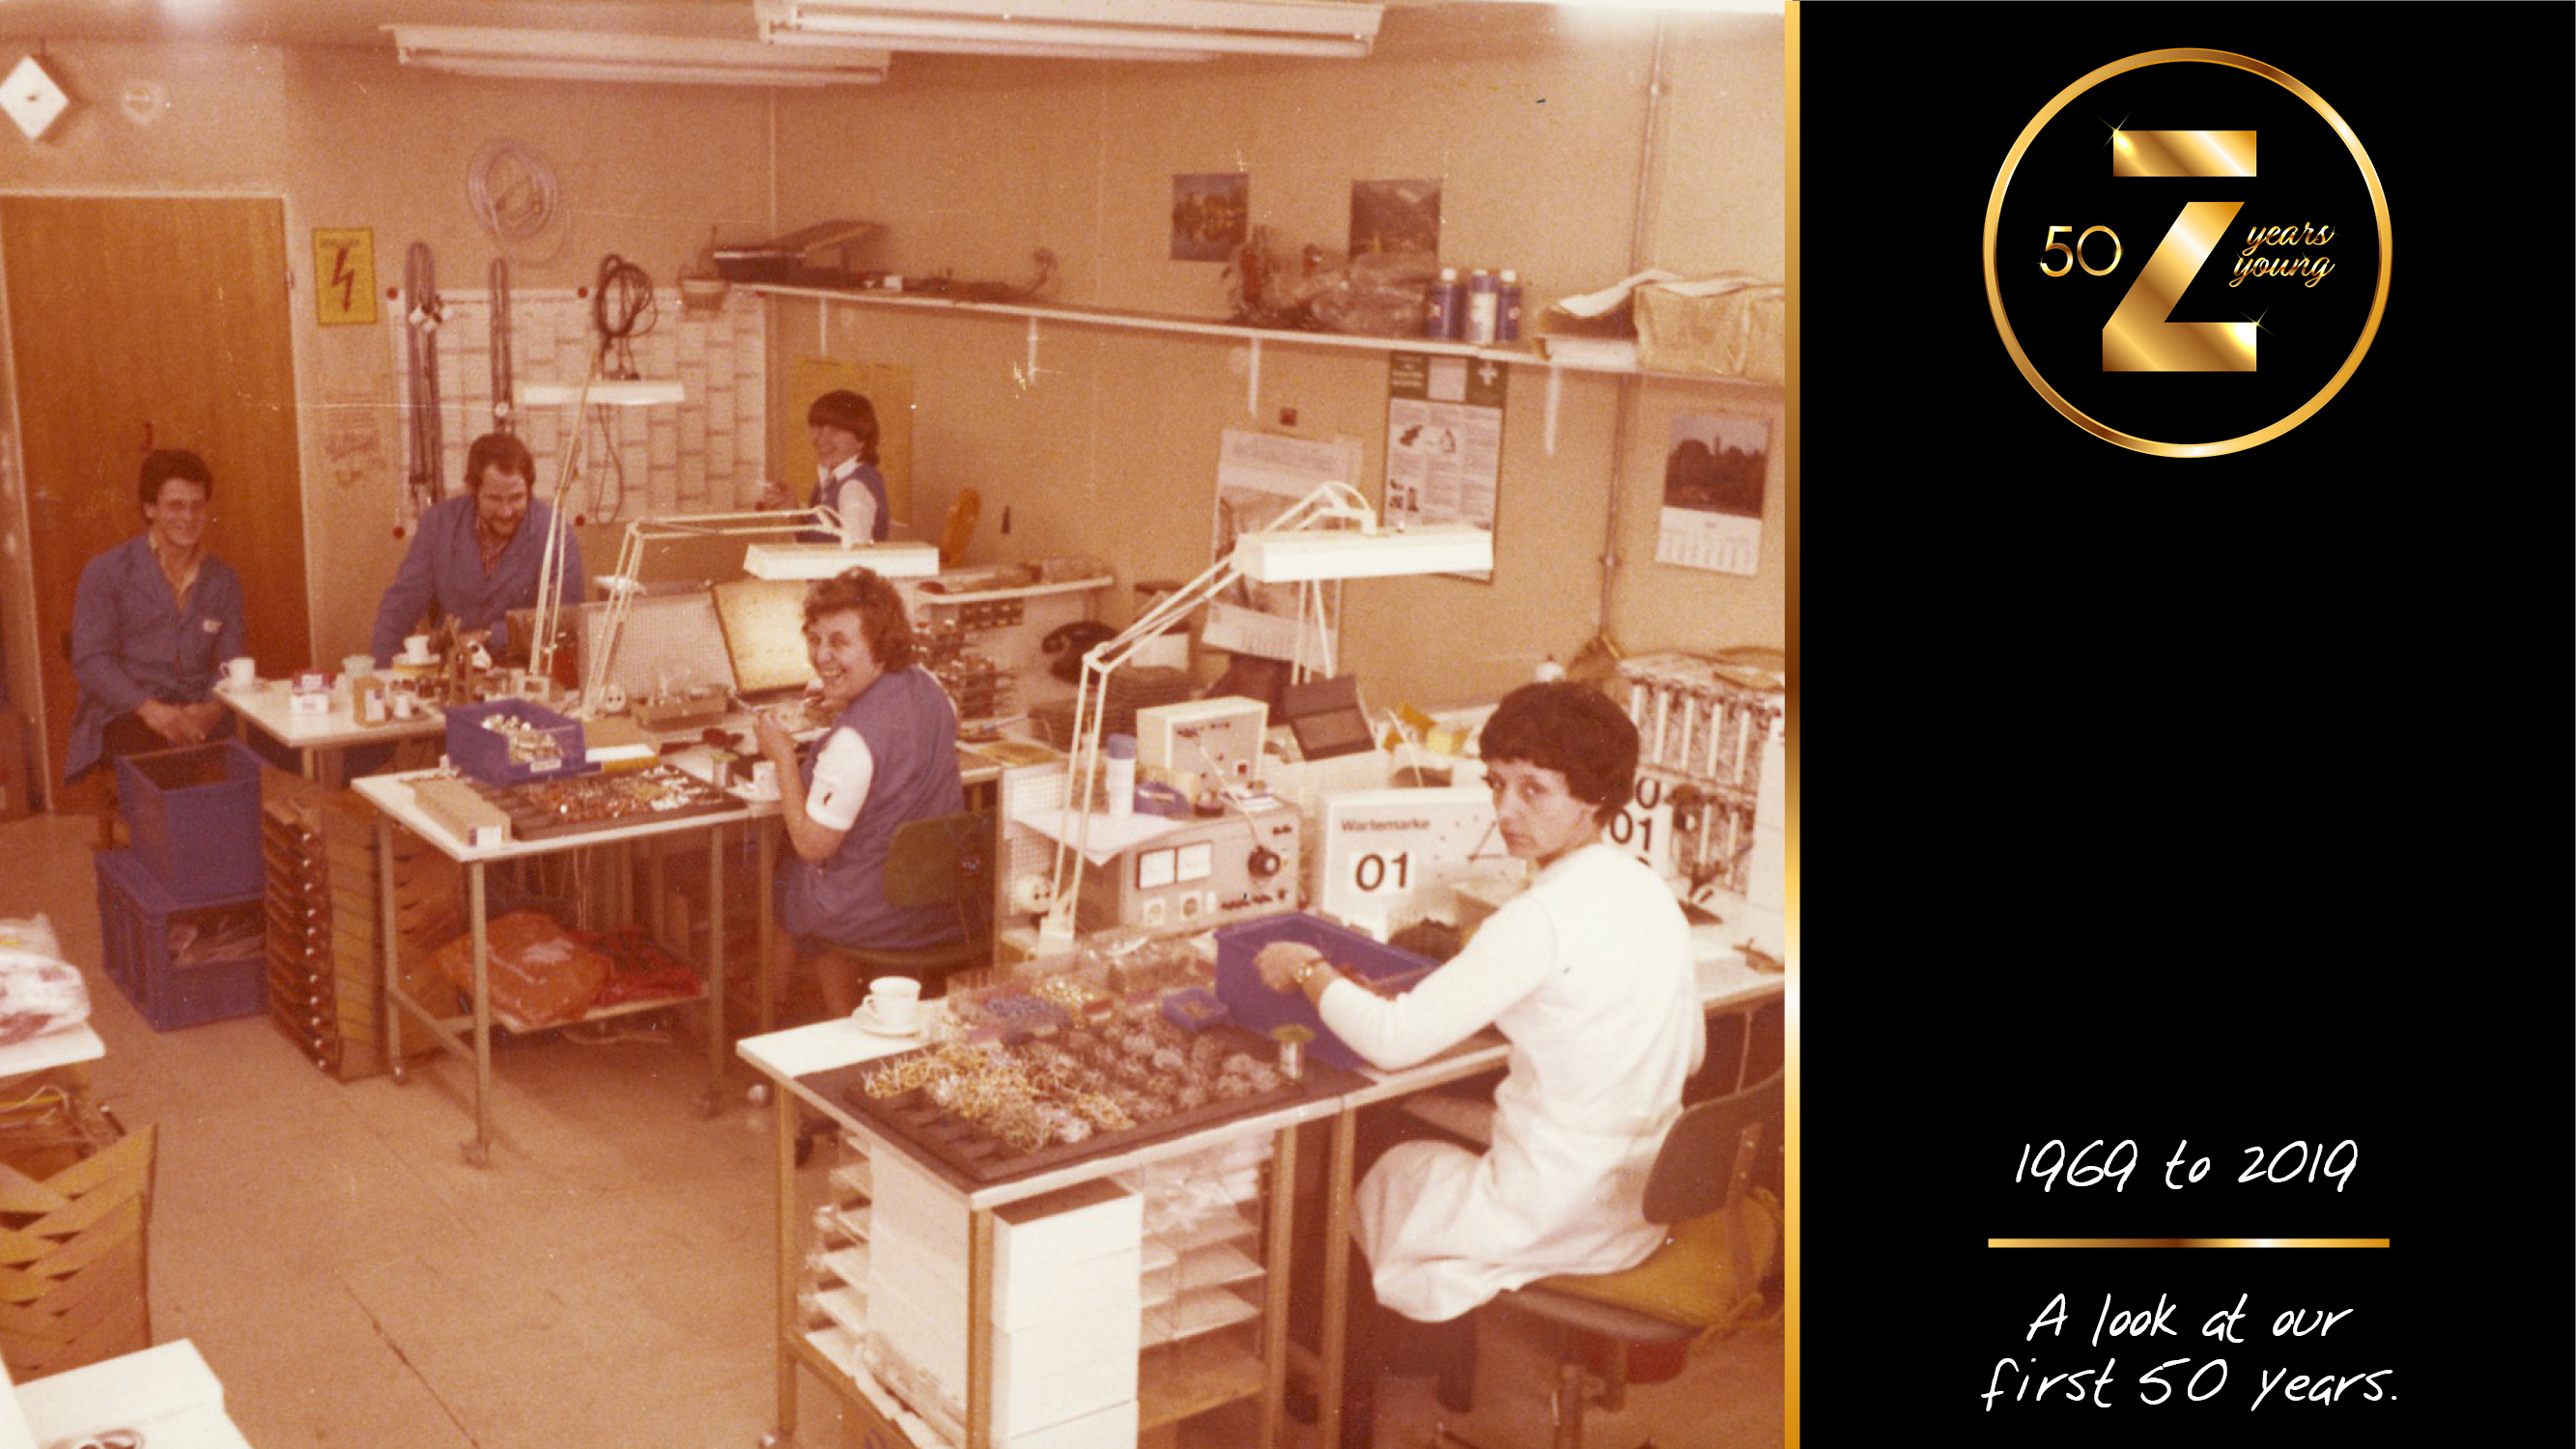 Zimmer Celebrates 50 Years Young - Production workers in the original location in Herrenkellergasse, Ulm, Germany.